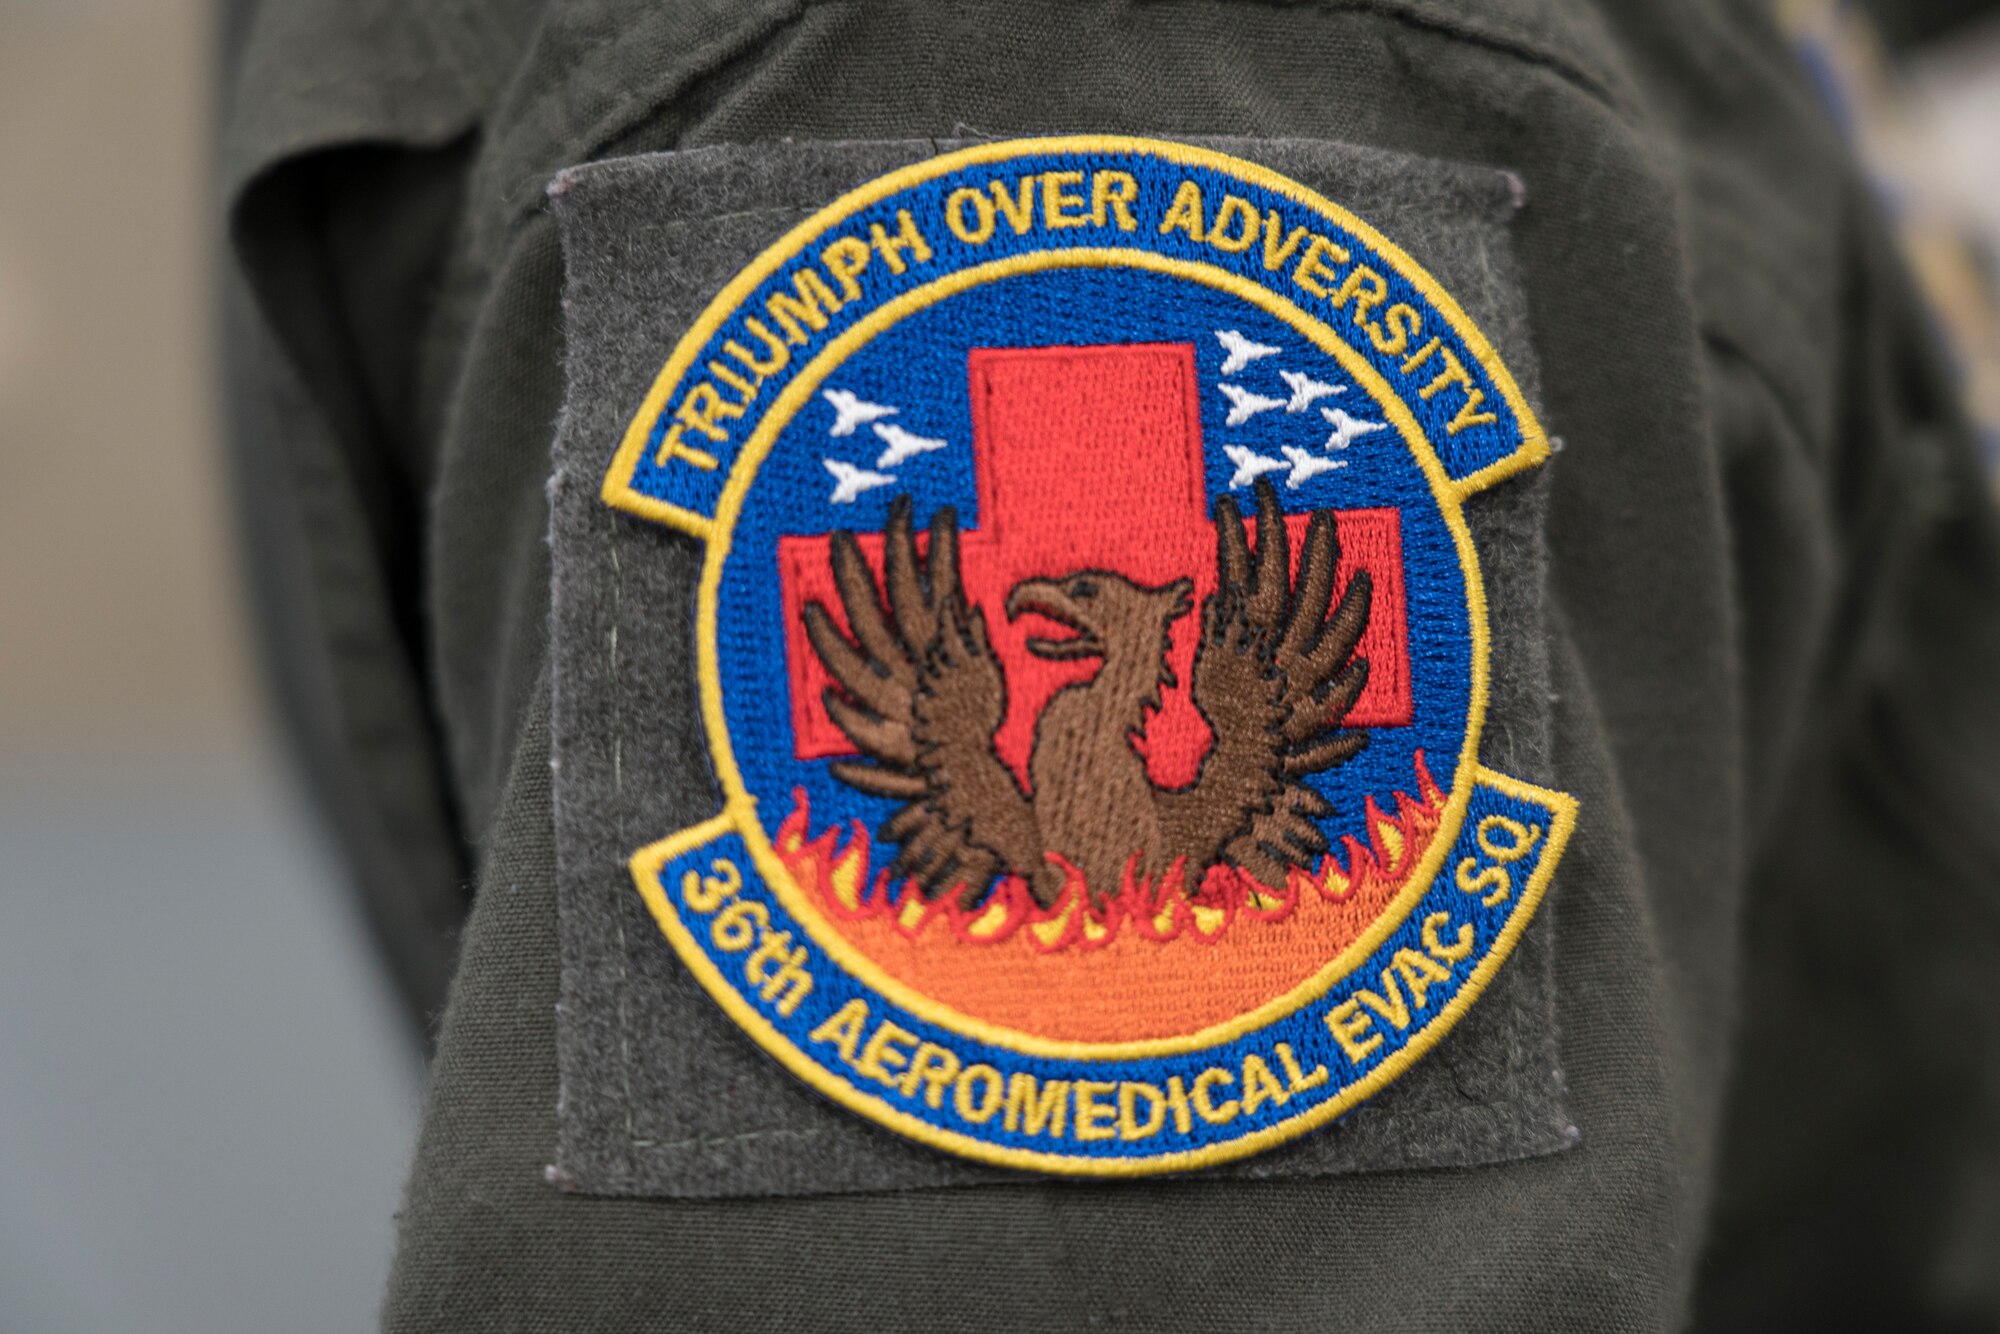 The 36th Aeromedical Evacuation Squadron is to provide lifesaving in-flight patient care in response for contingencies and humanitarian emergencies. “Our motto is ‘Triumph Over Adversity,’ and that personifies who we are and will always be,” said Lt. Col. Rosalind Johnson, 36th AES director of operations. (U.S. Air Force photo by Tech. Sgt. Christopher Carranza)